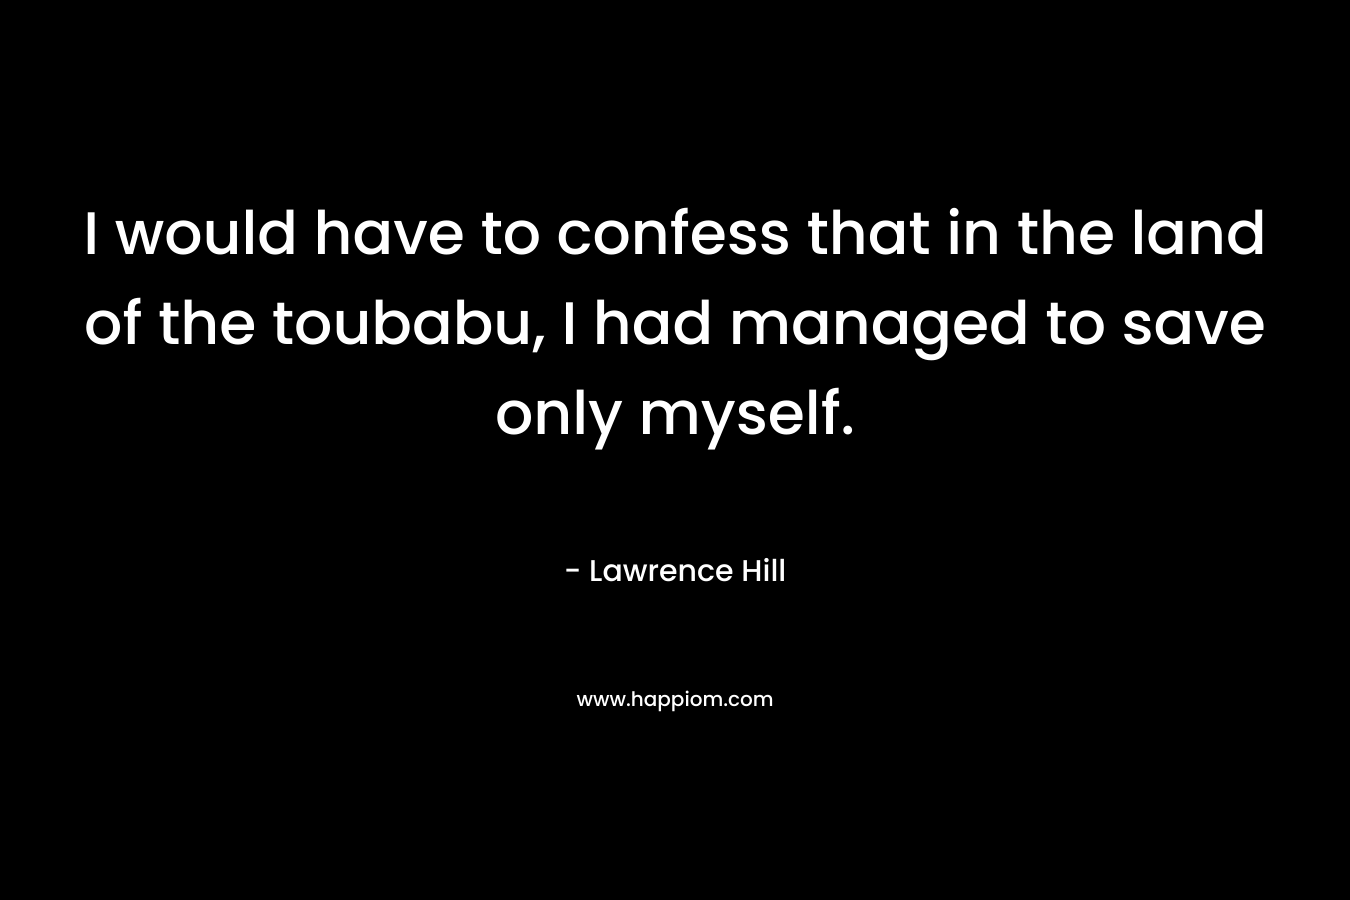 I would have to confess that in the land of the toubabu, I had managed to save only myself. – Lawrence Hill